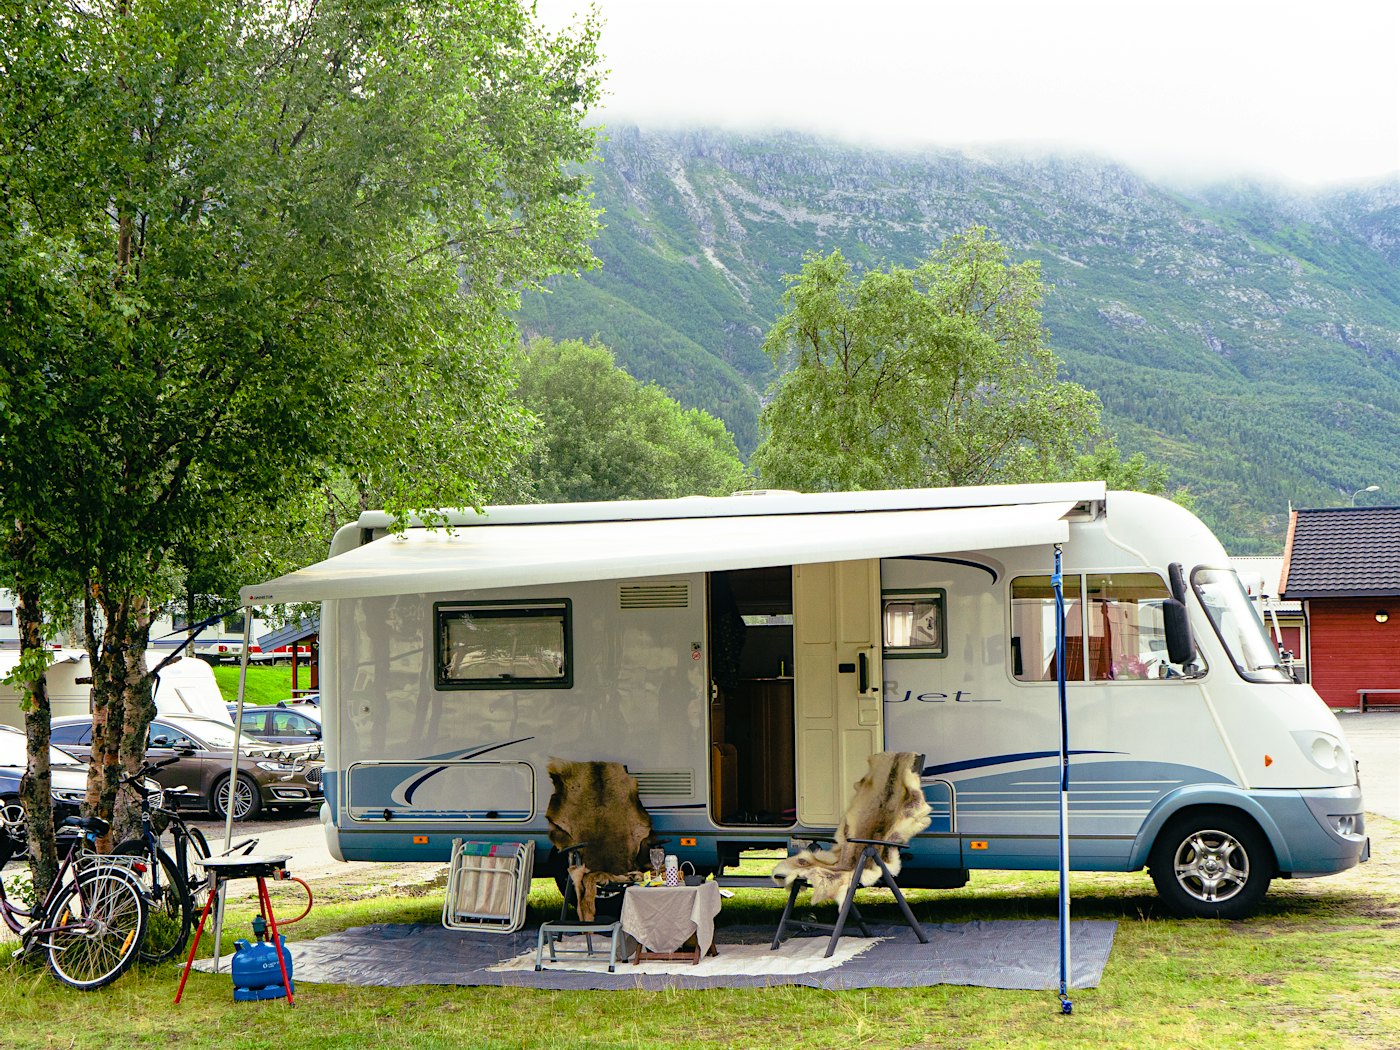 Motorhome with outdoor furniture and bicycles in front. Nicely located by a tree, with mountains in the background. Photo